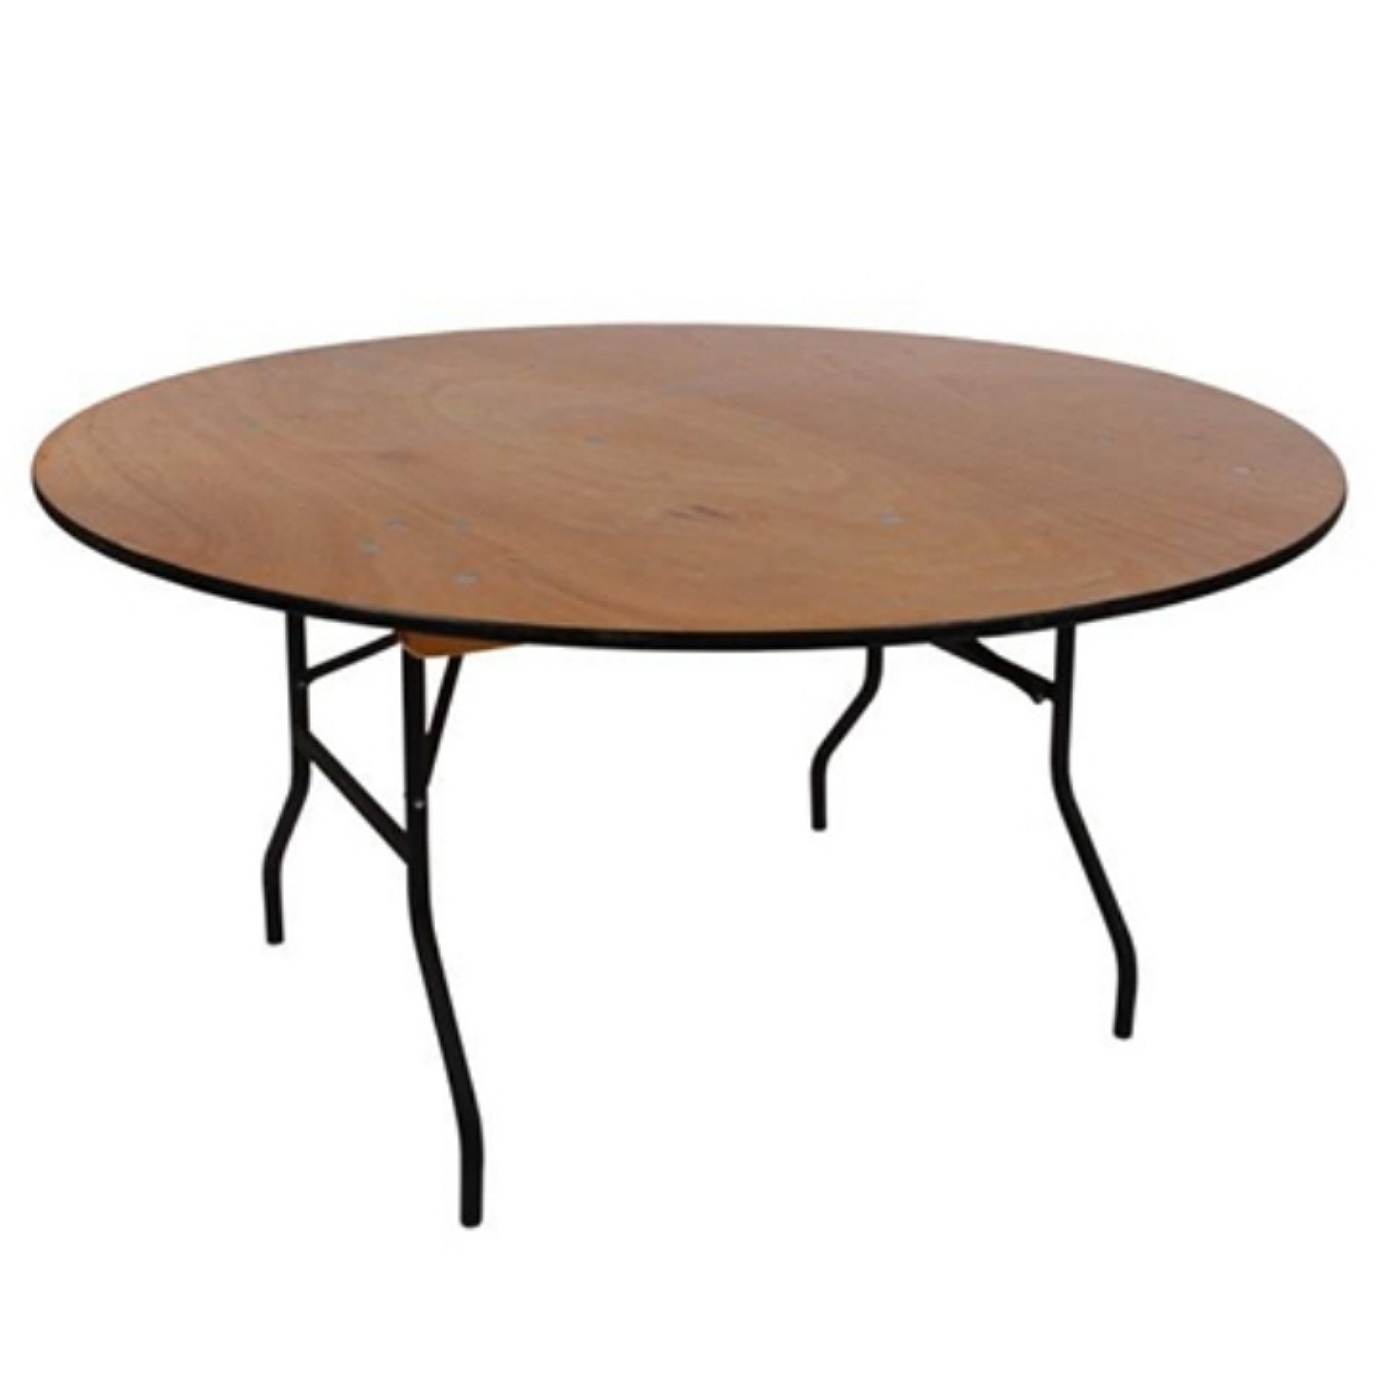 Fold-able Round Steel Frame Table 10 Seater.